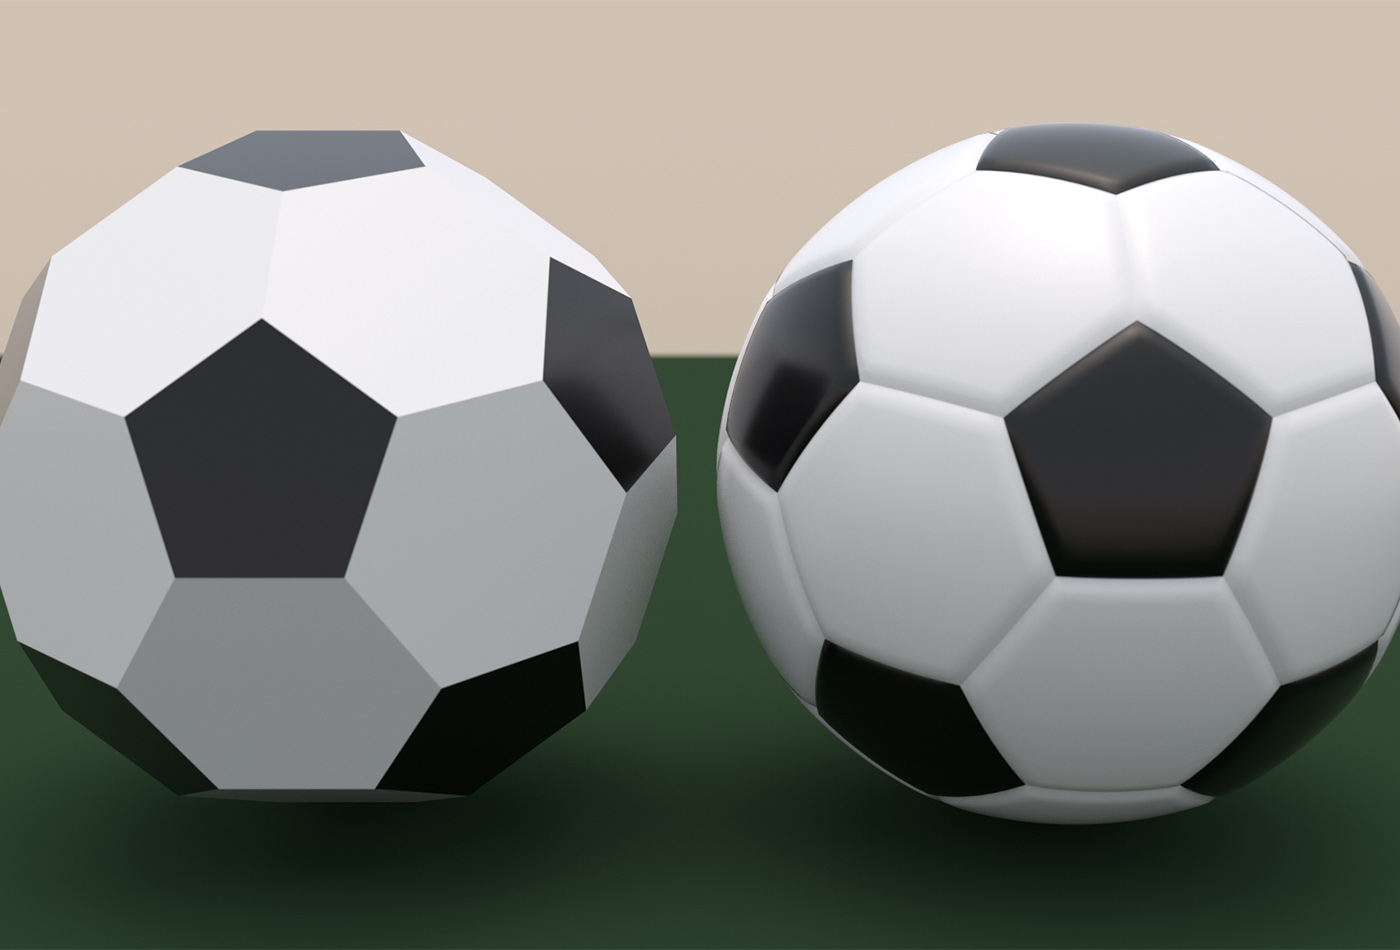 Comparison of a truncated icosahedron and a soccer ball